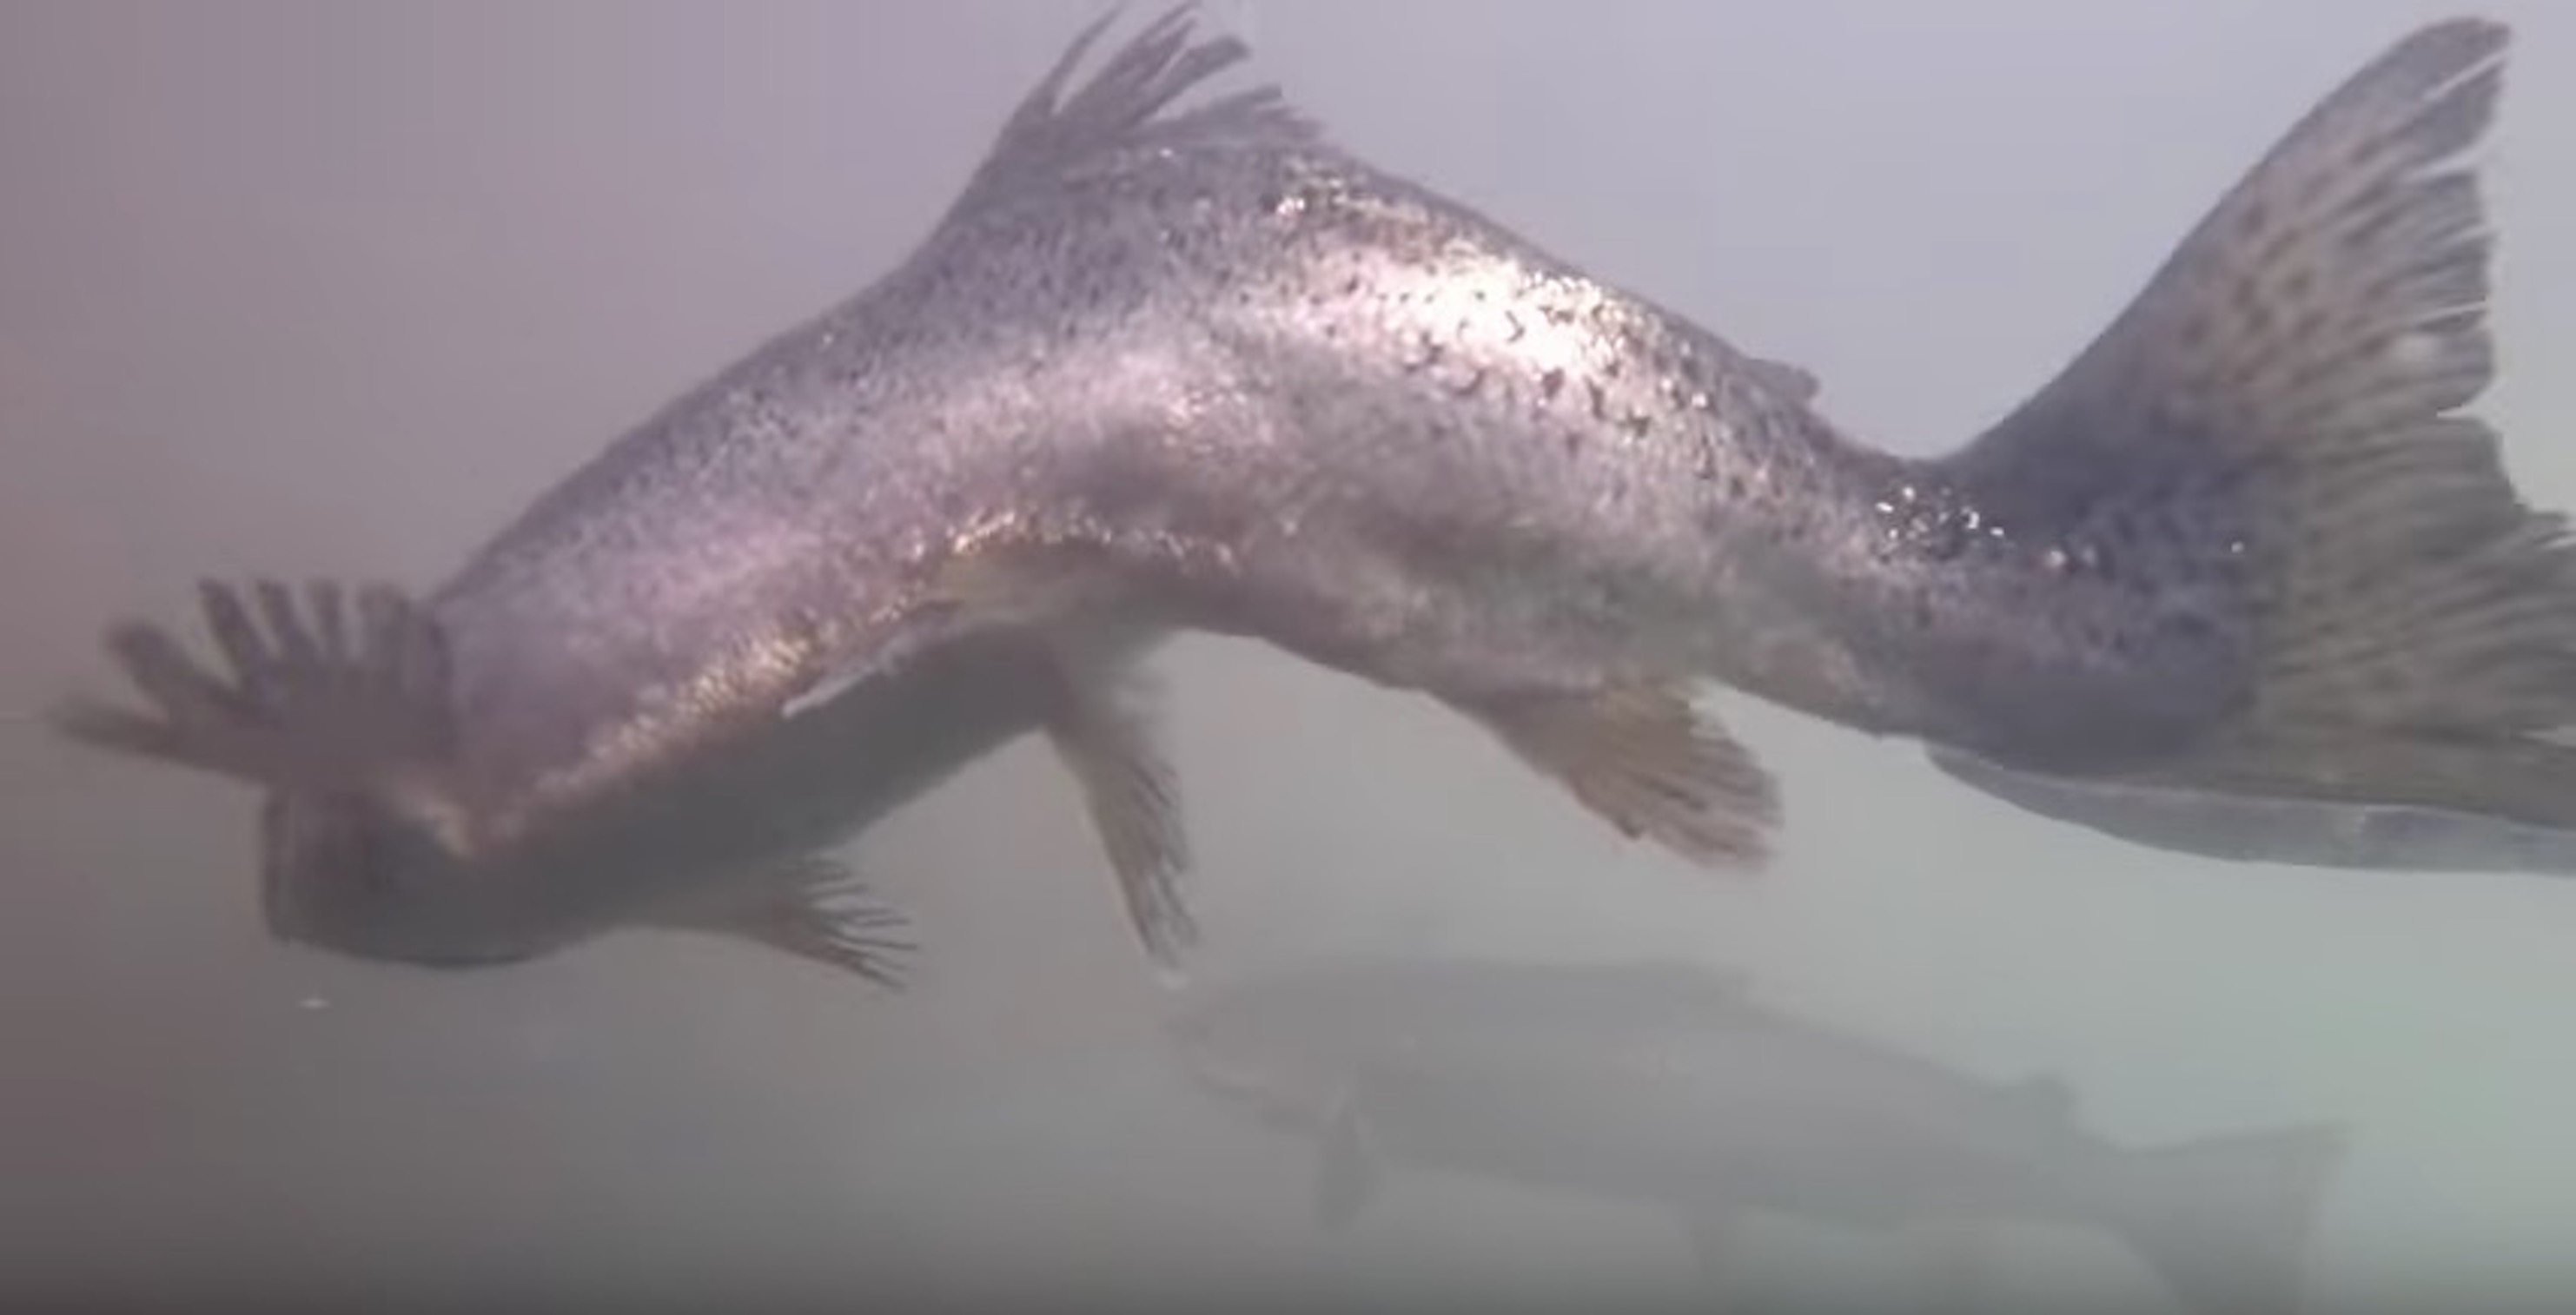 Images from a youtube video using footage captured by First Nation members in British Columbia show injured and unhealthy salmon inside net pens.